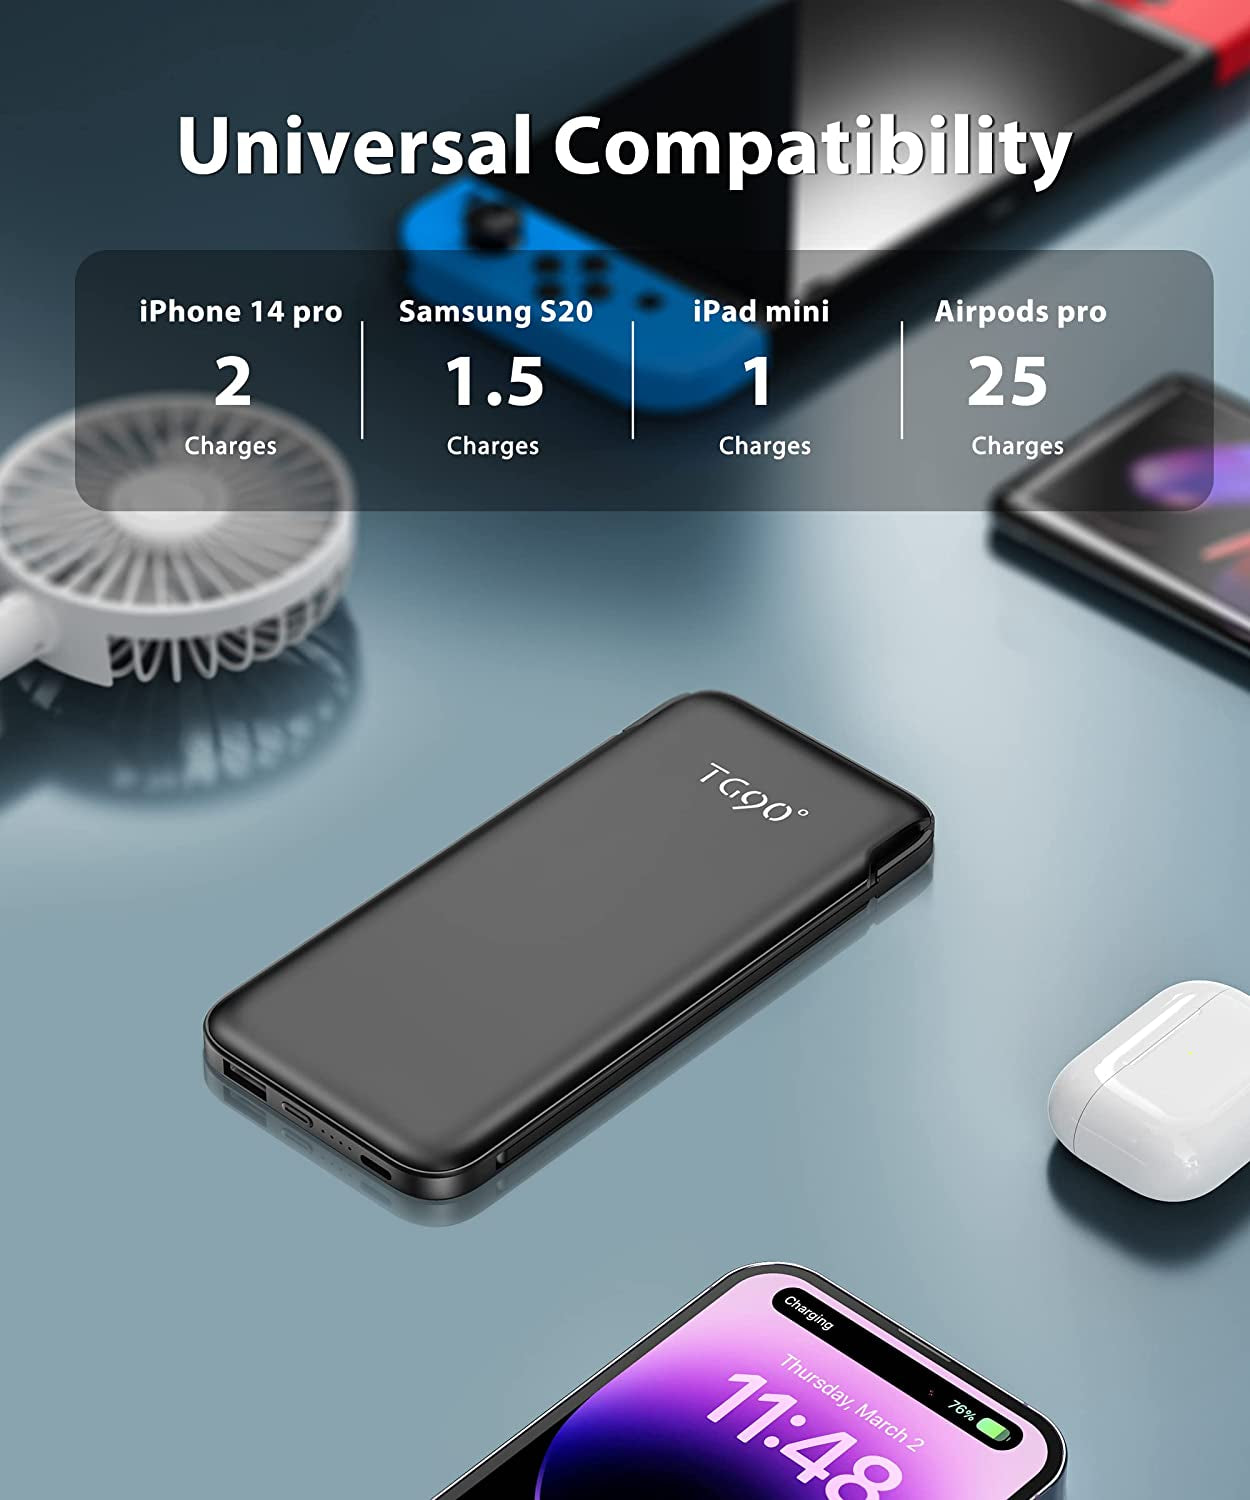 All-in-One 10000mAh Portable Charger with Built-in Cables, AC Wall Plug, and Compatibility with iPhone and Android Phones